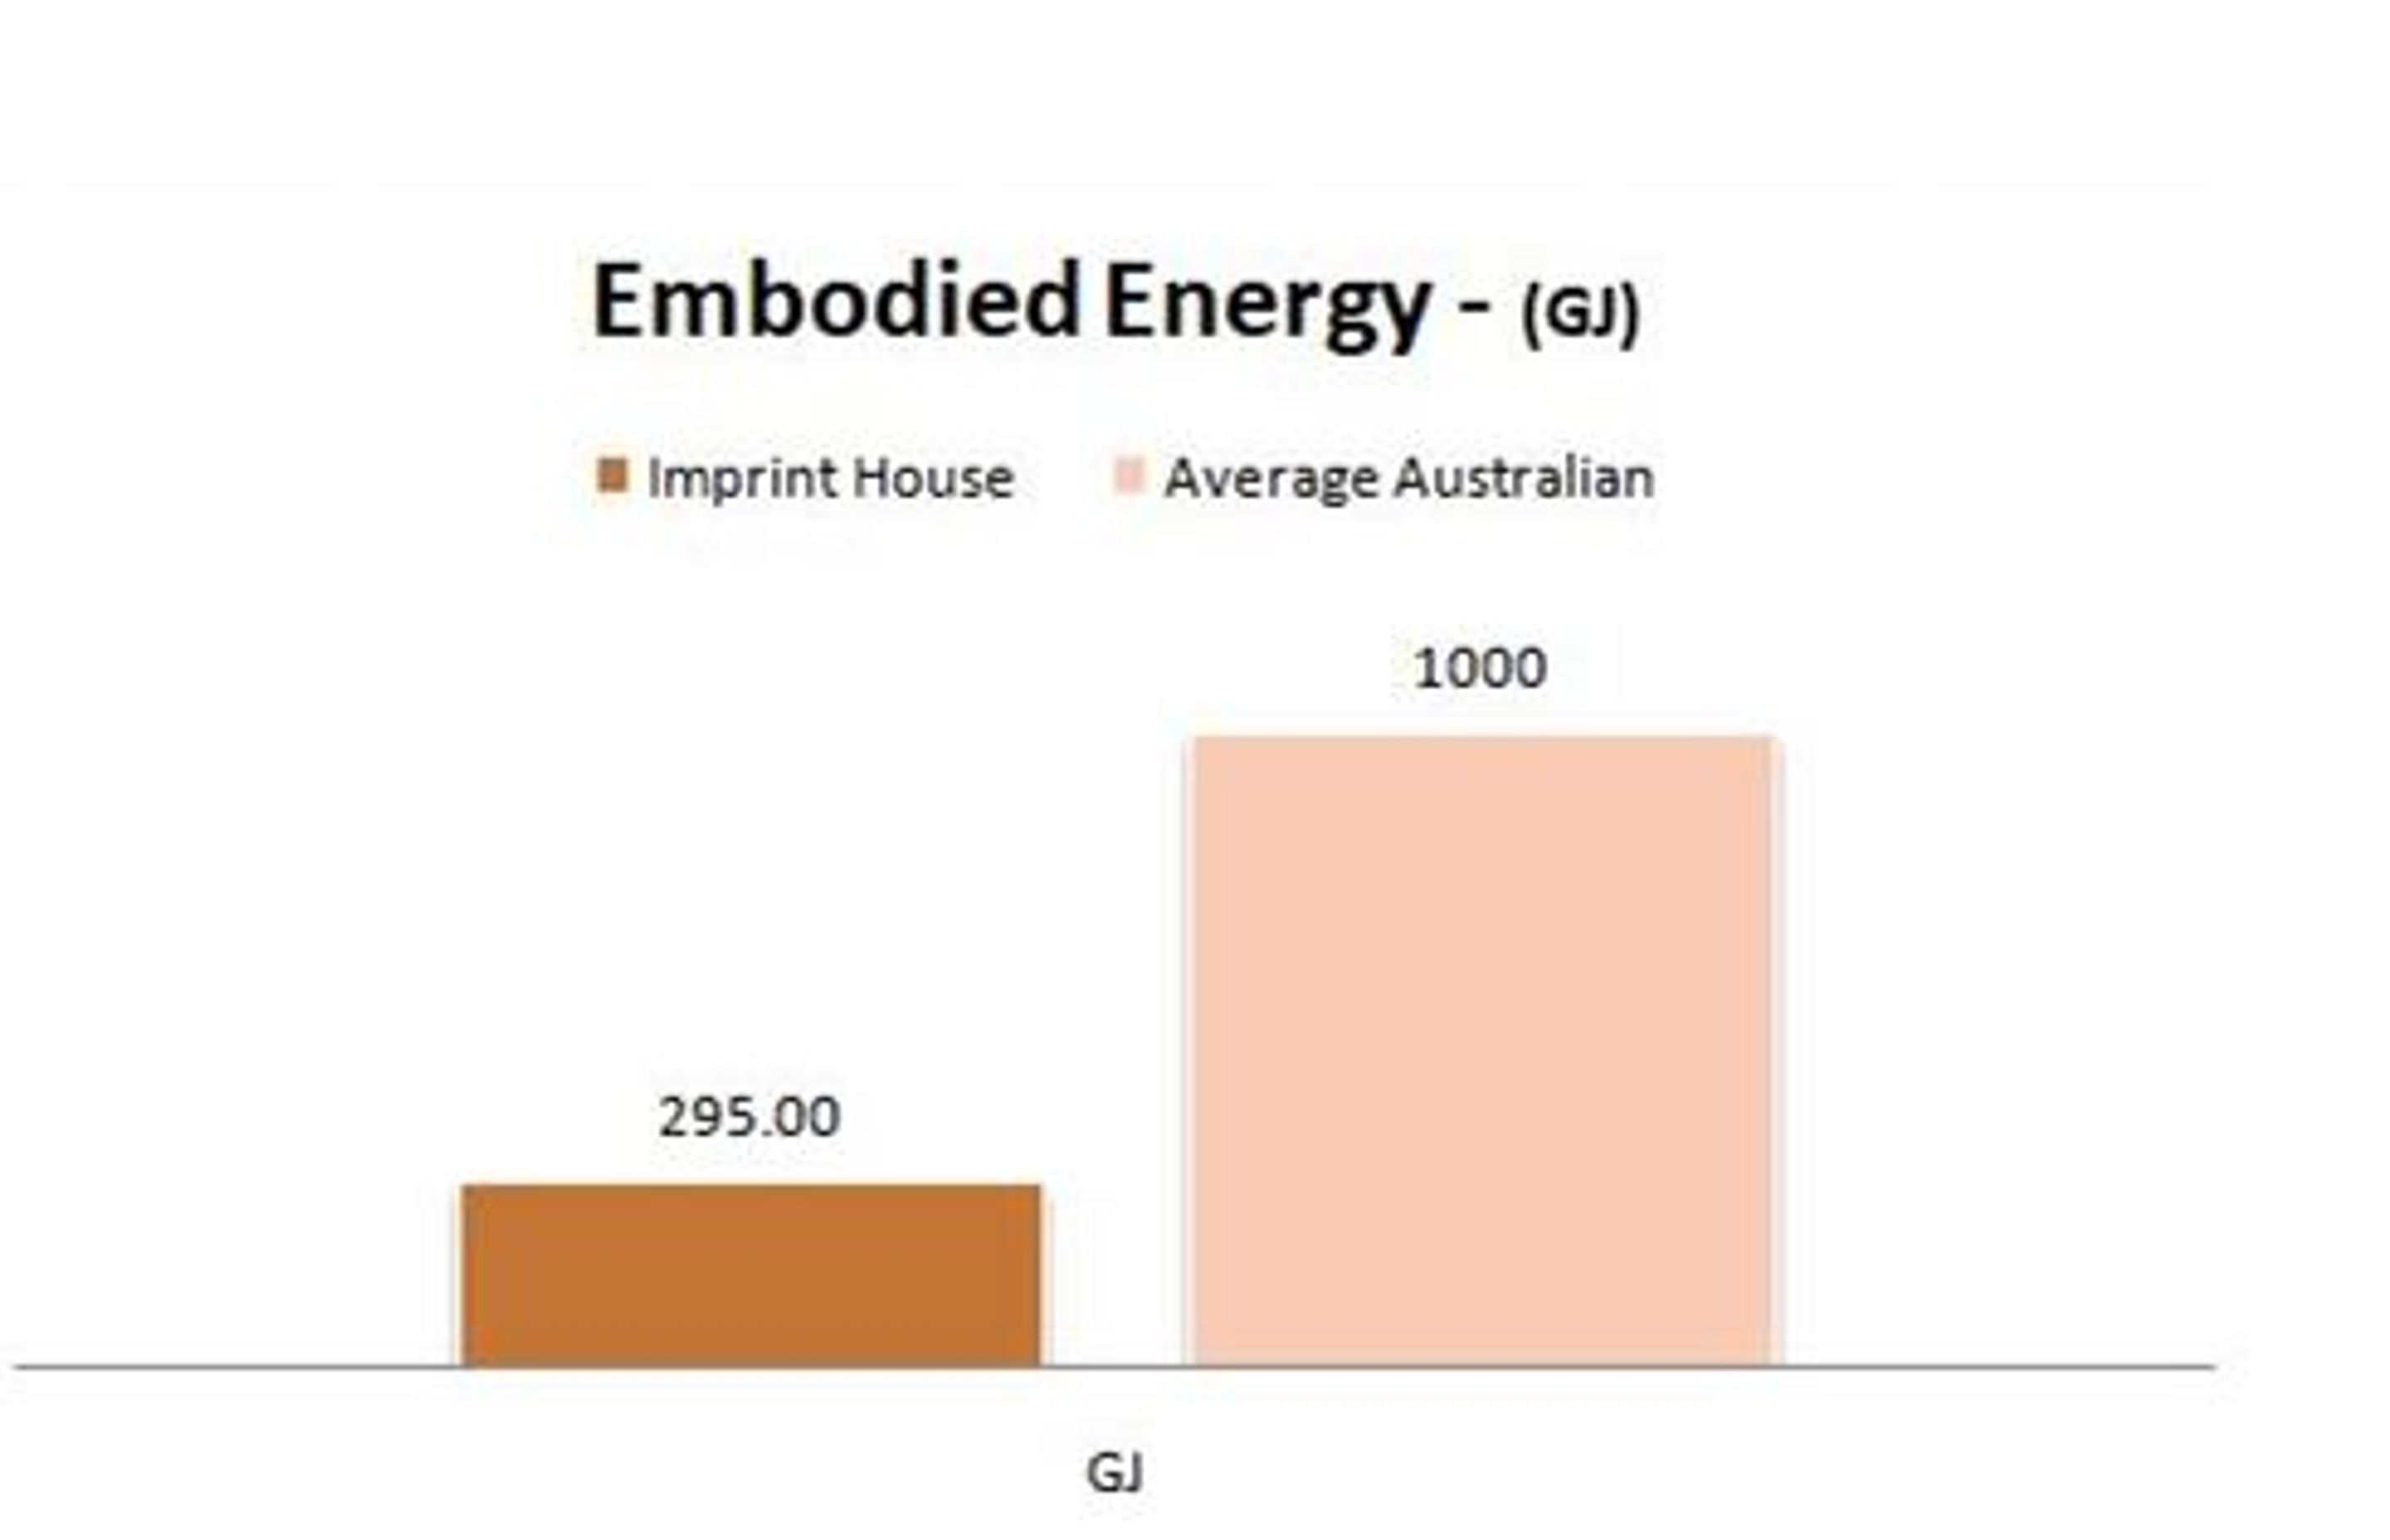 The embodied energy of a typical house in Australia compared to that of Imprint House.